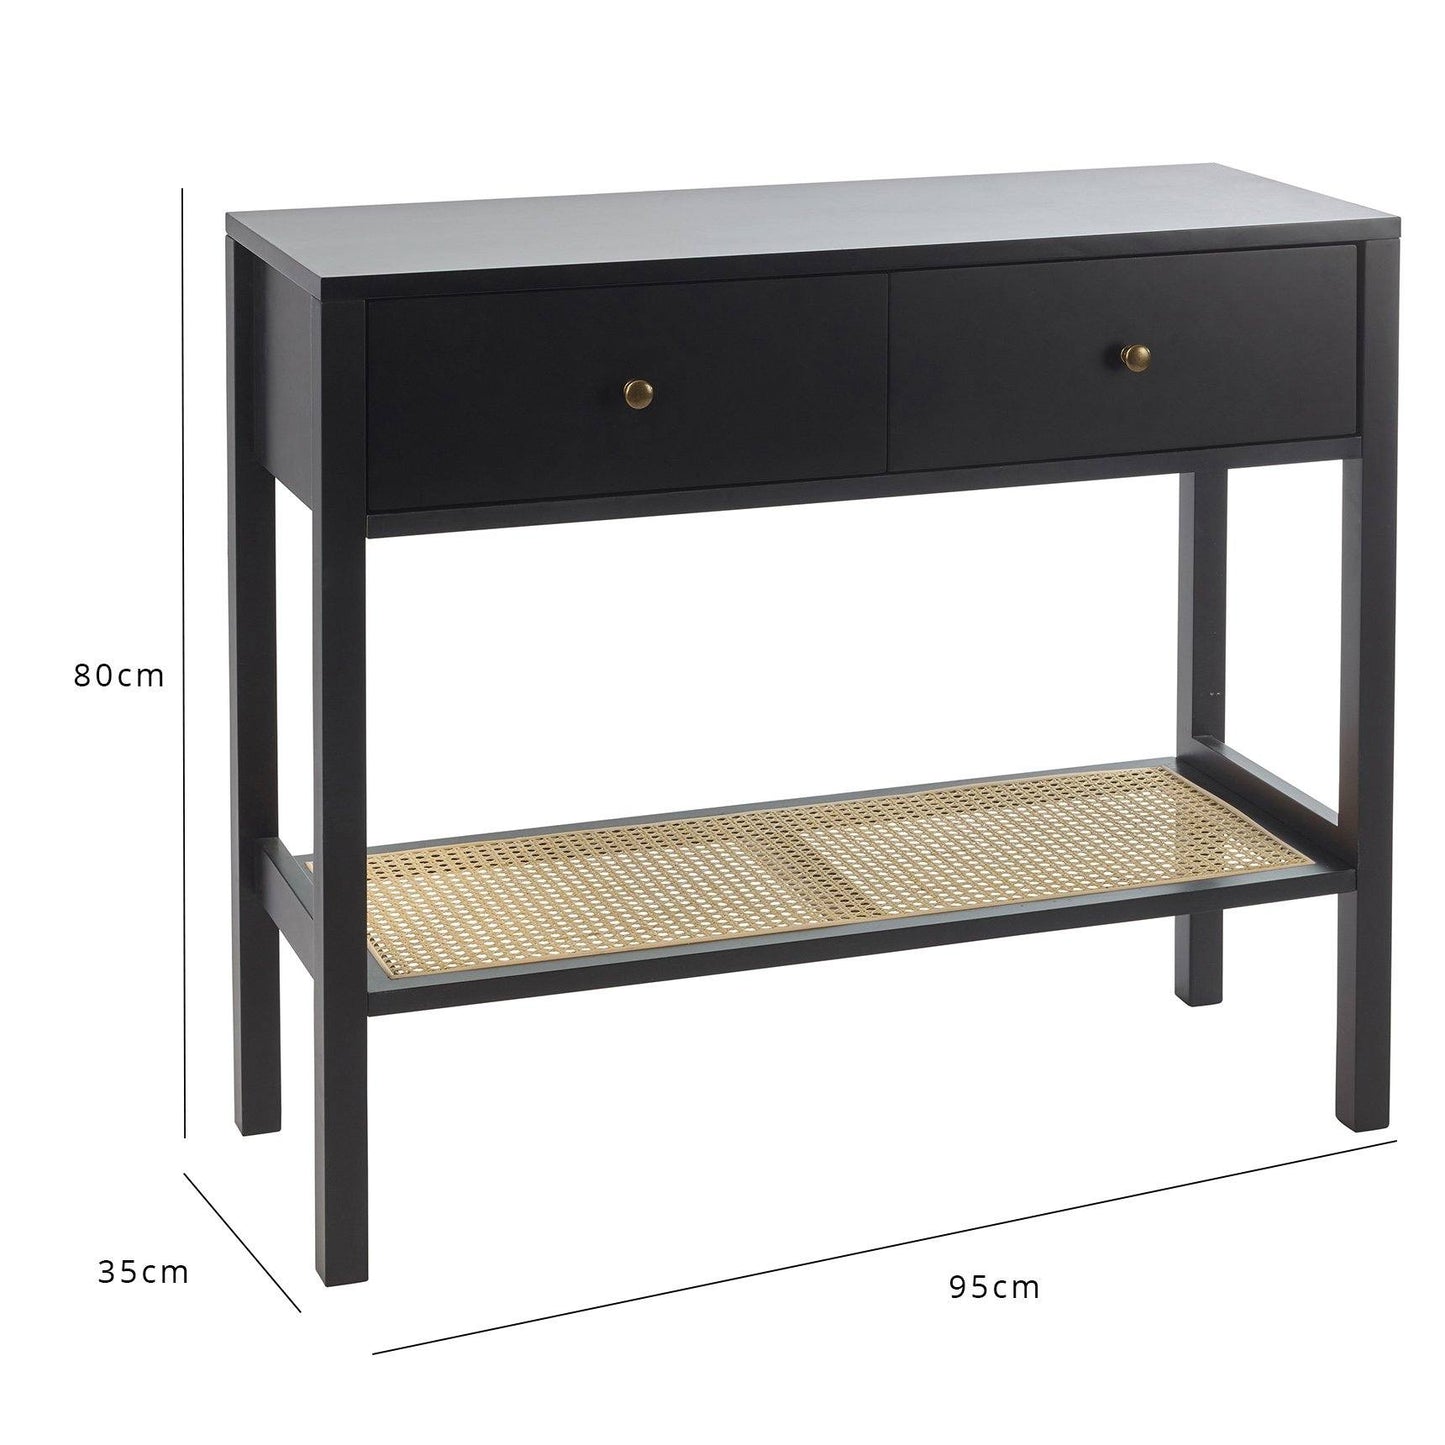 Charlie console table - black - Laura James